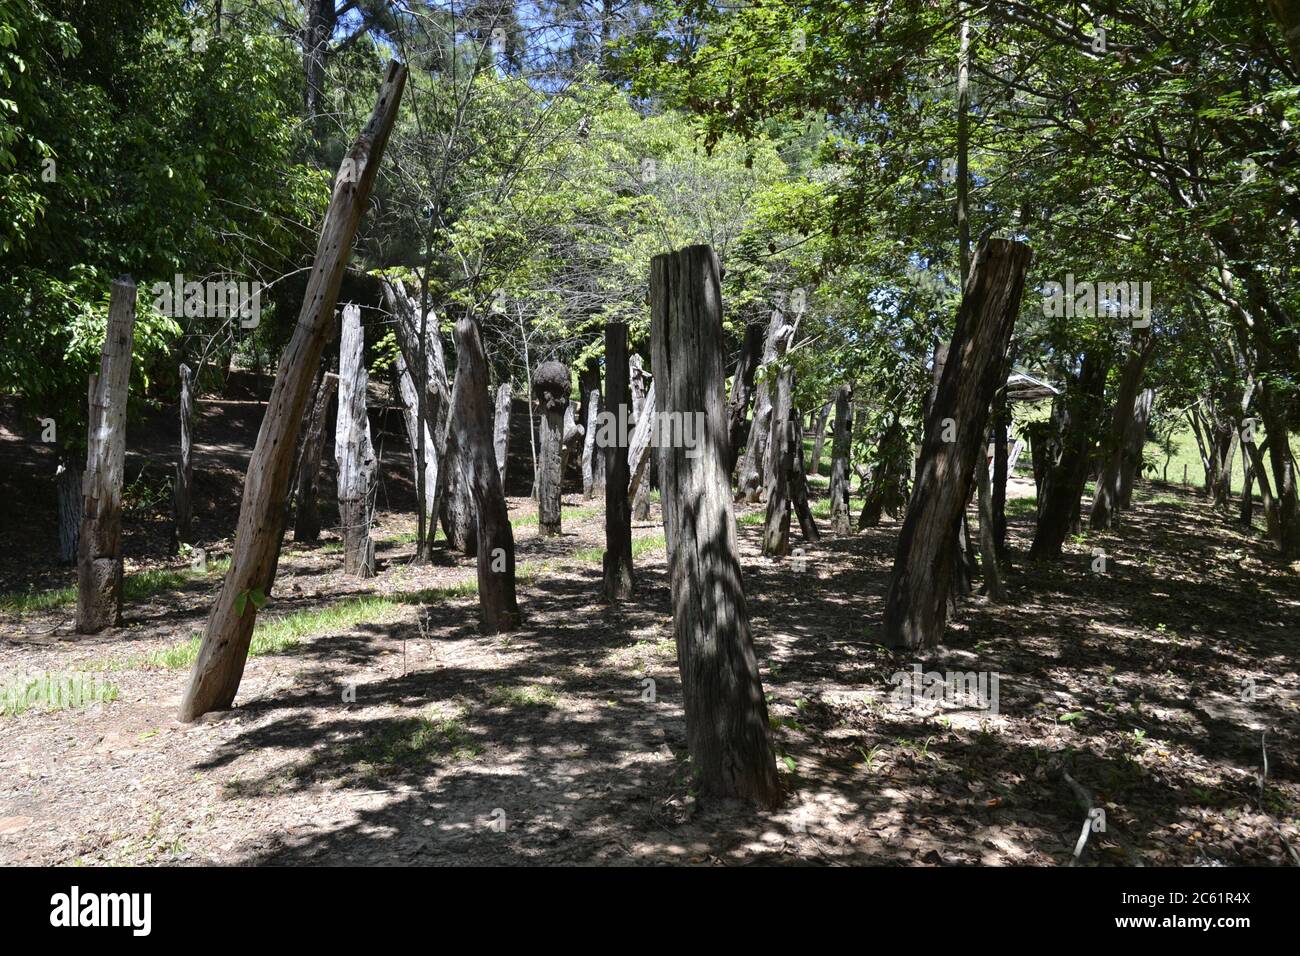 Log or trunck forest, in ecotourism farm, in the interior of Brazil, showing logs of trees and vegetation, Brazil, South America Stock Photo